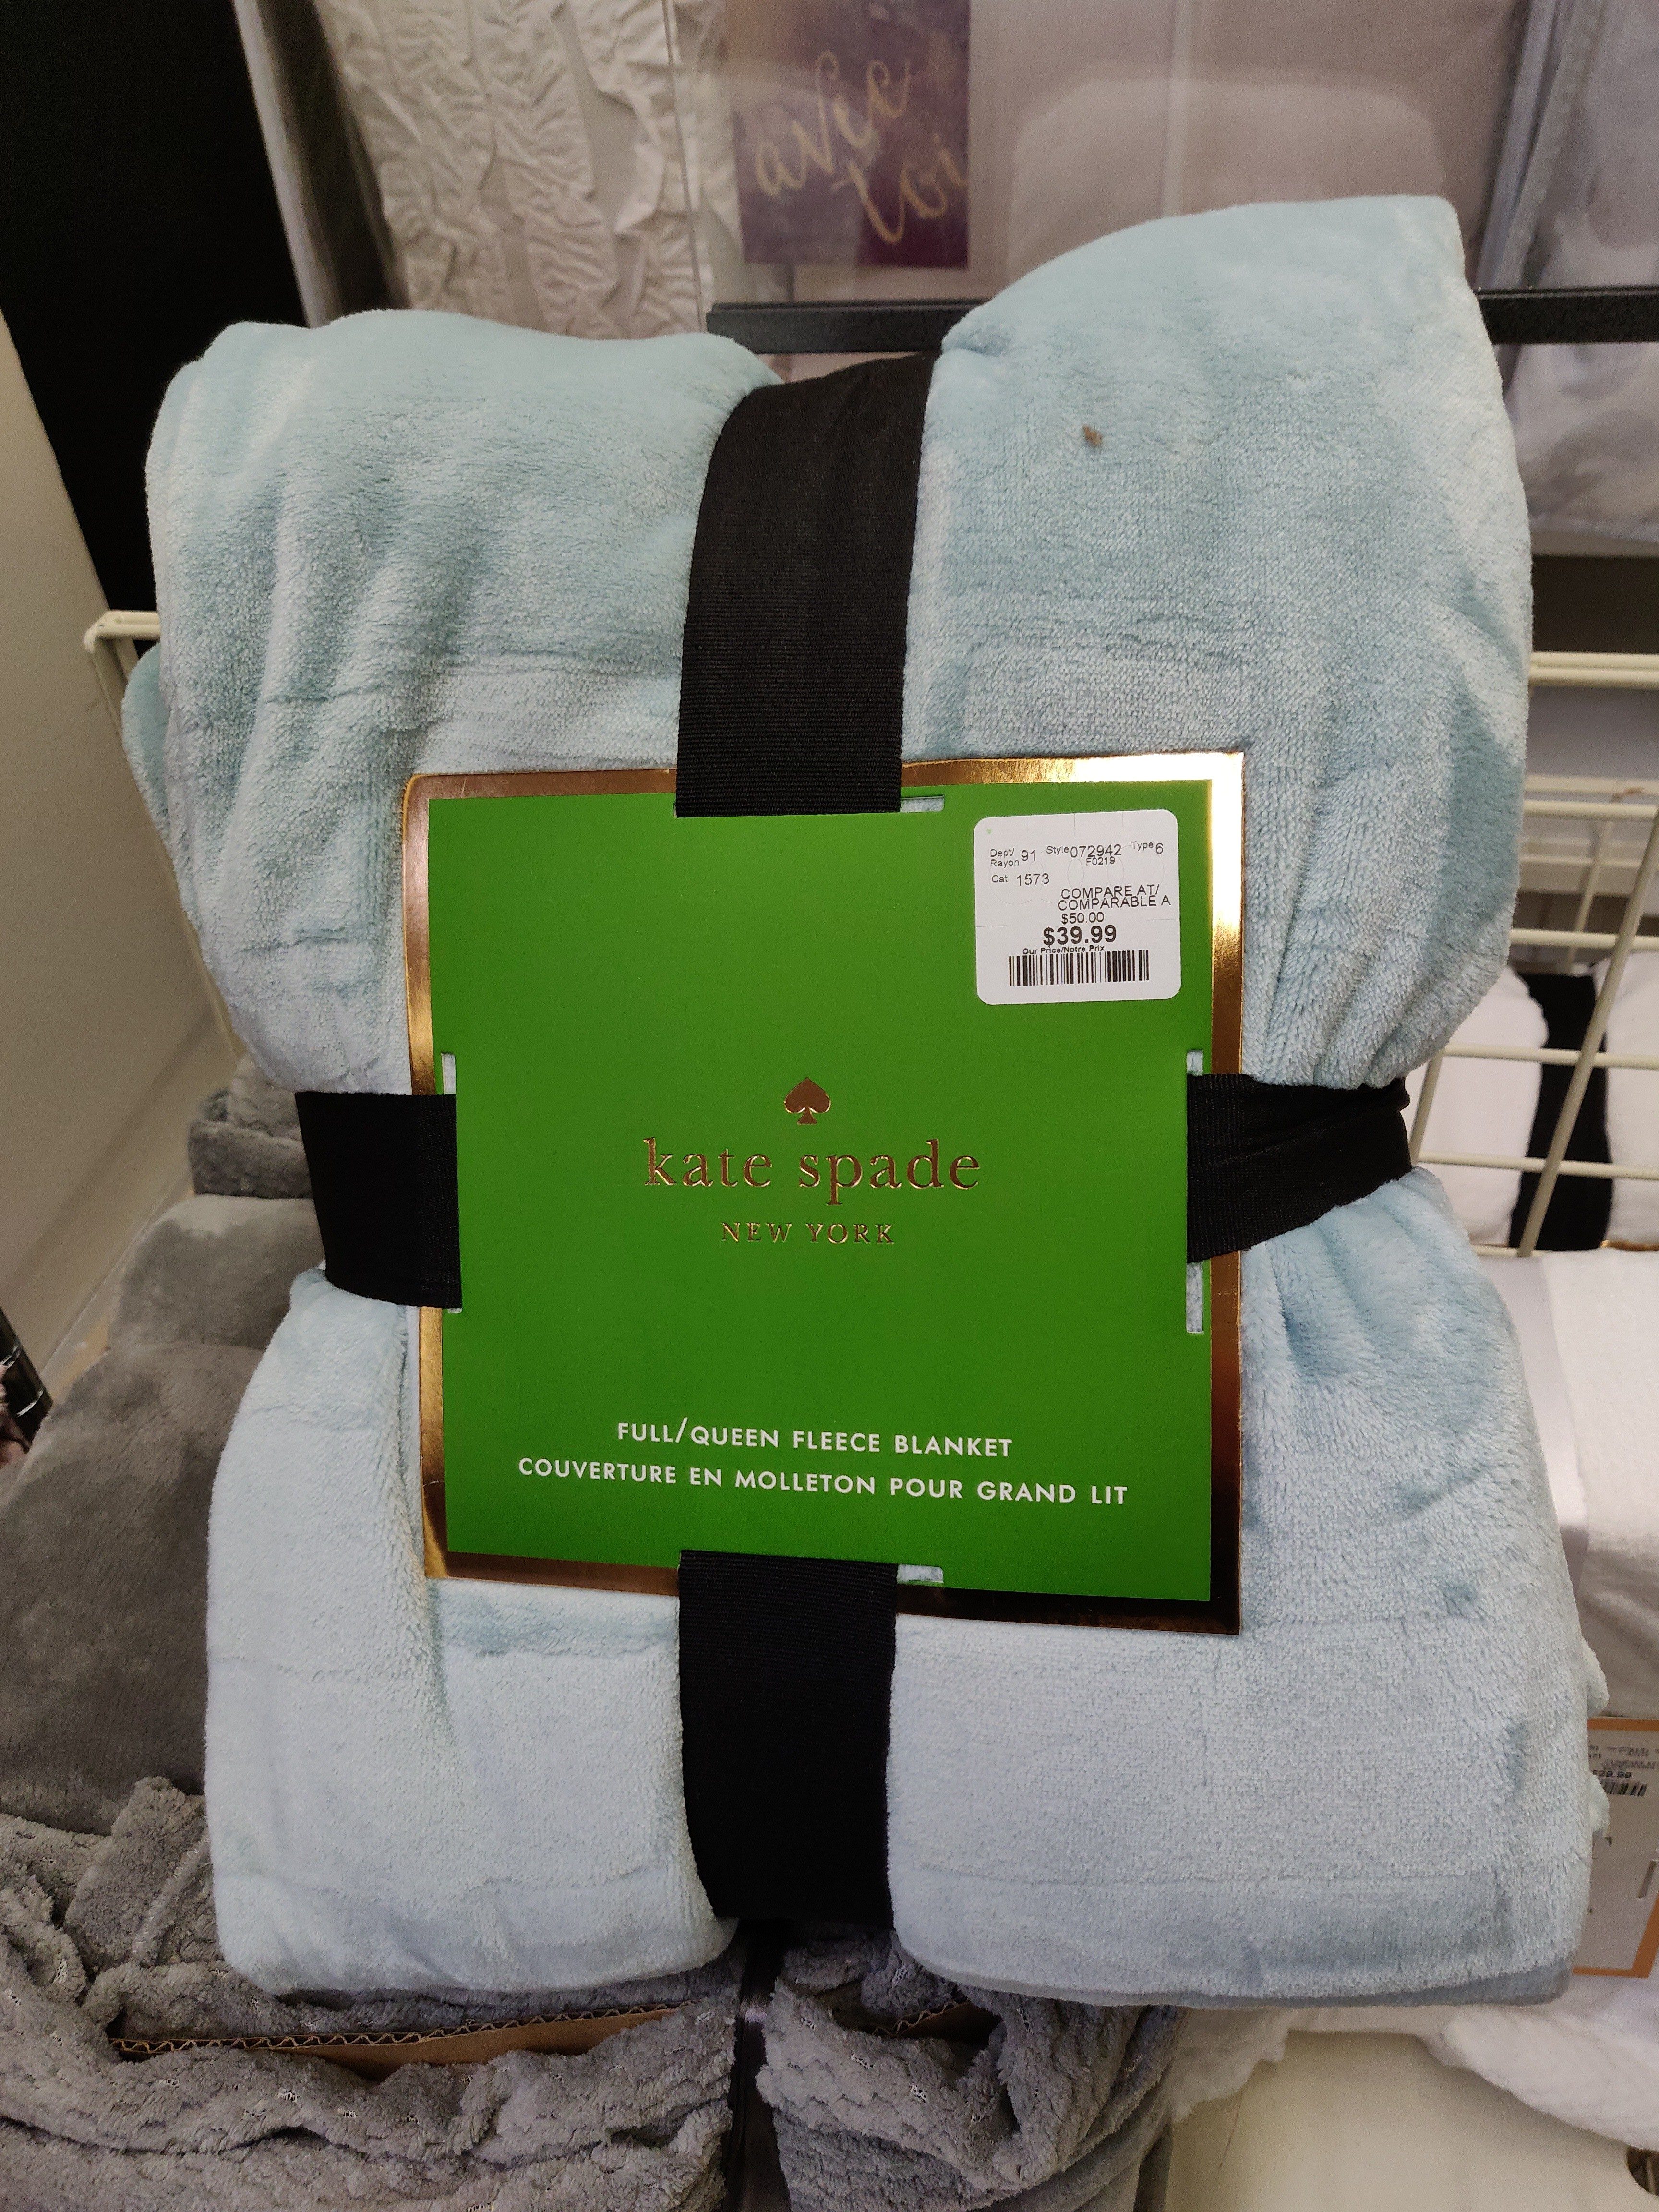 Costco] Kate Spade Blanket - In Store $ - Page 7   Forums